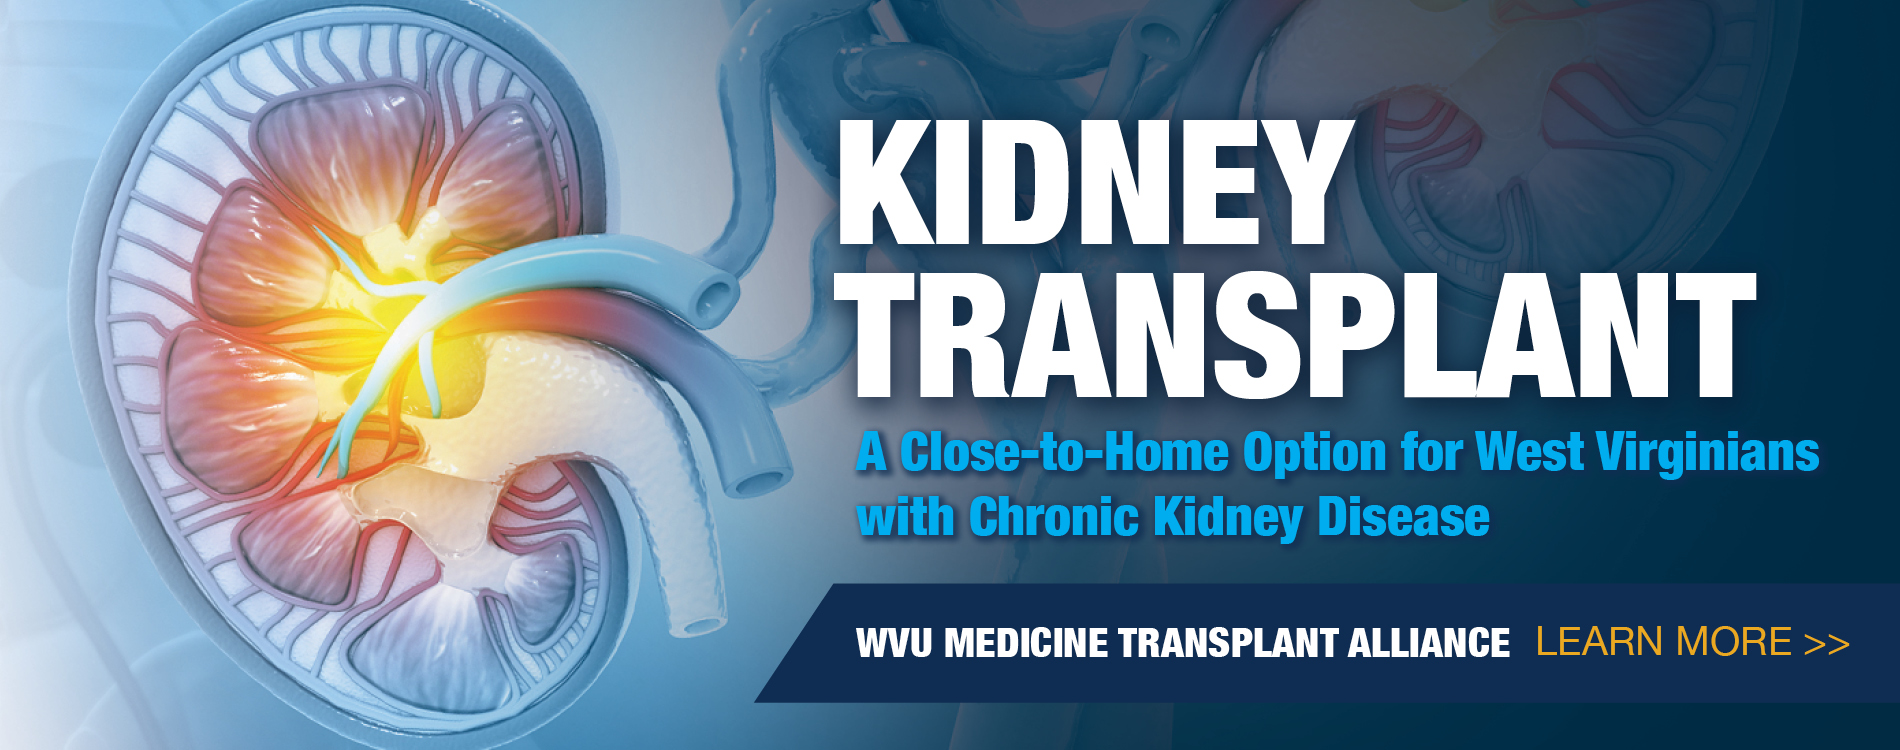 Kidney Transplant A close-to-home option for West Virginians with chronic kidney disease